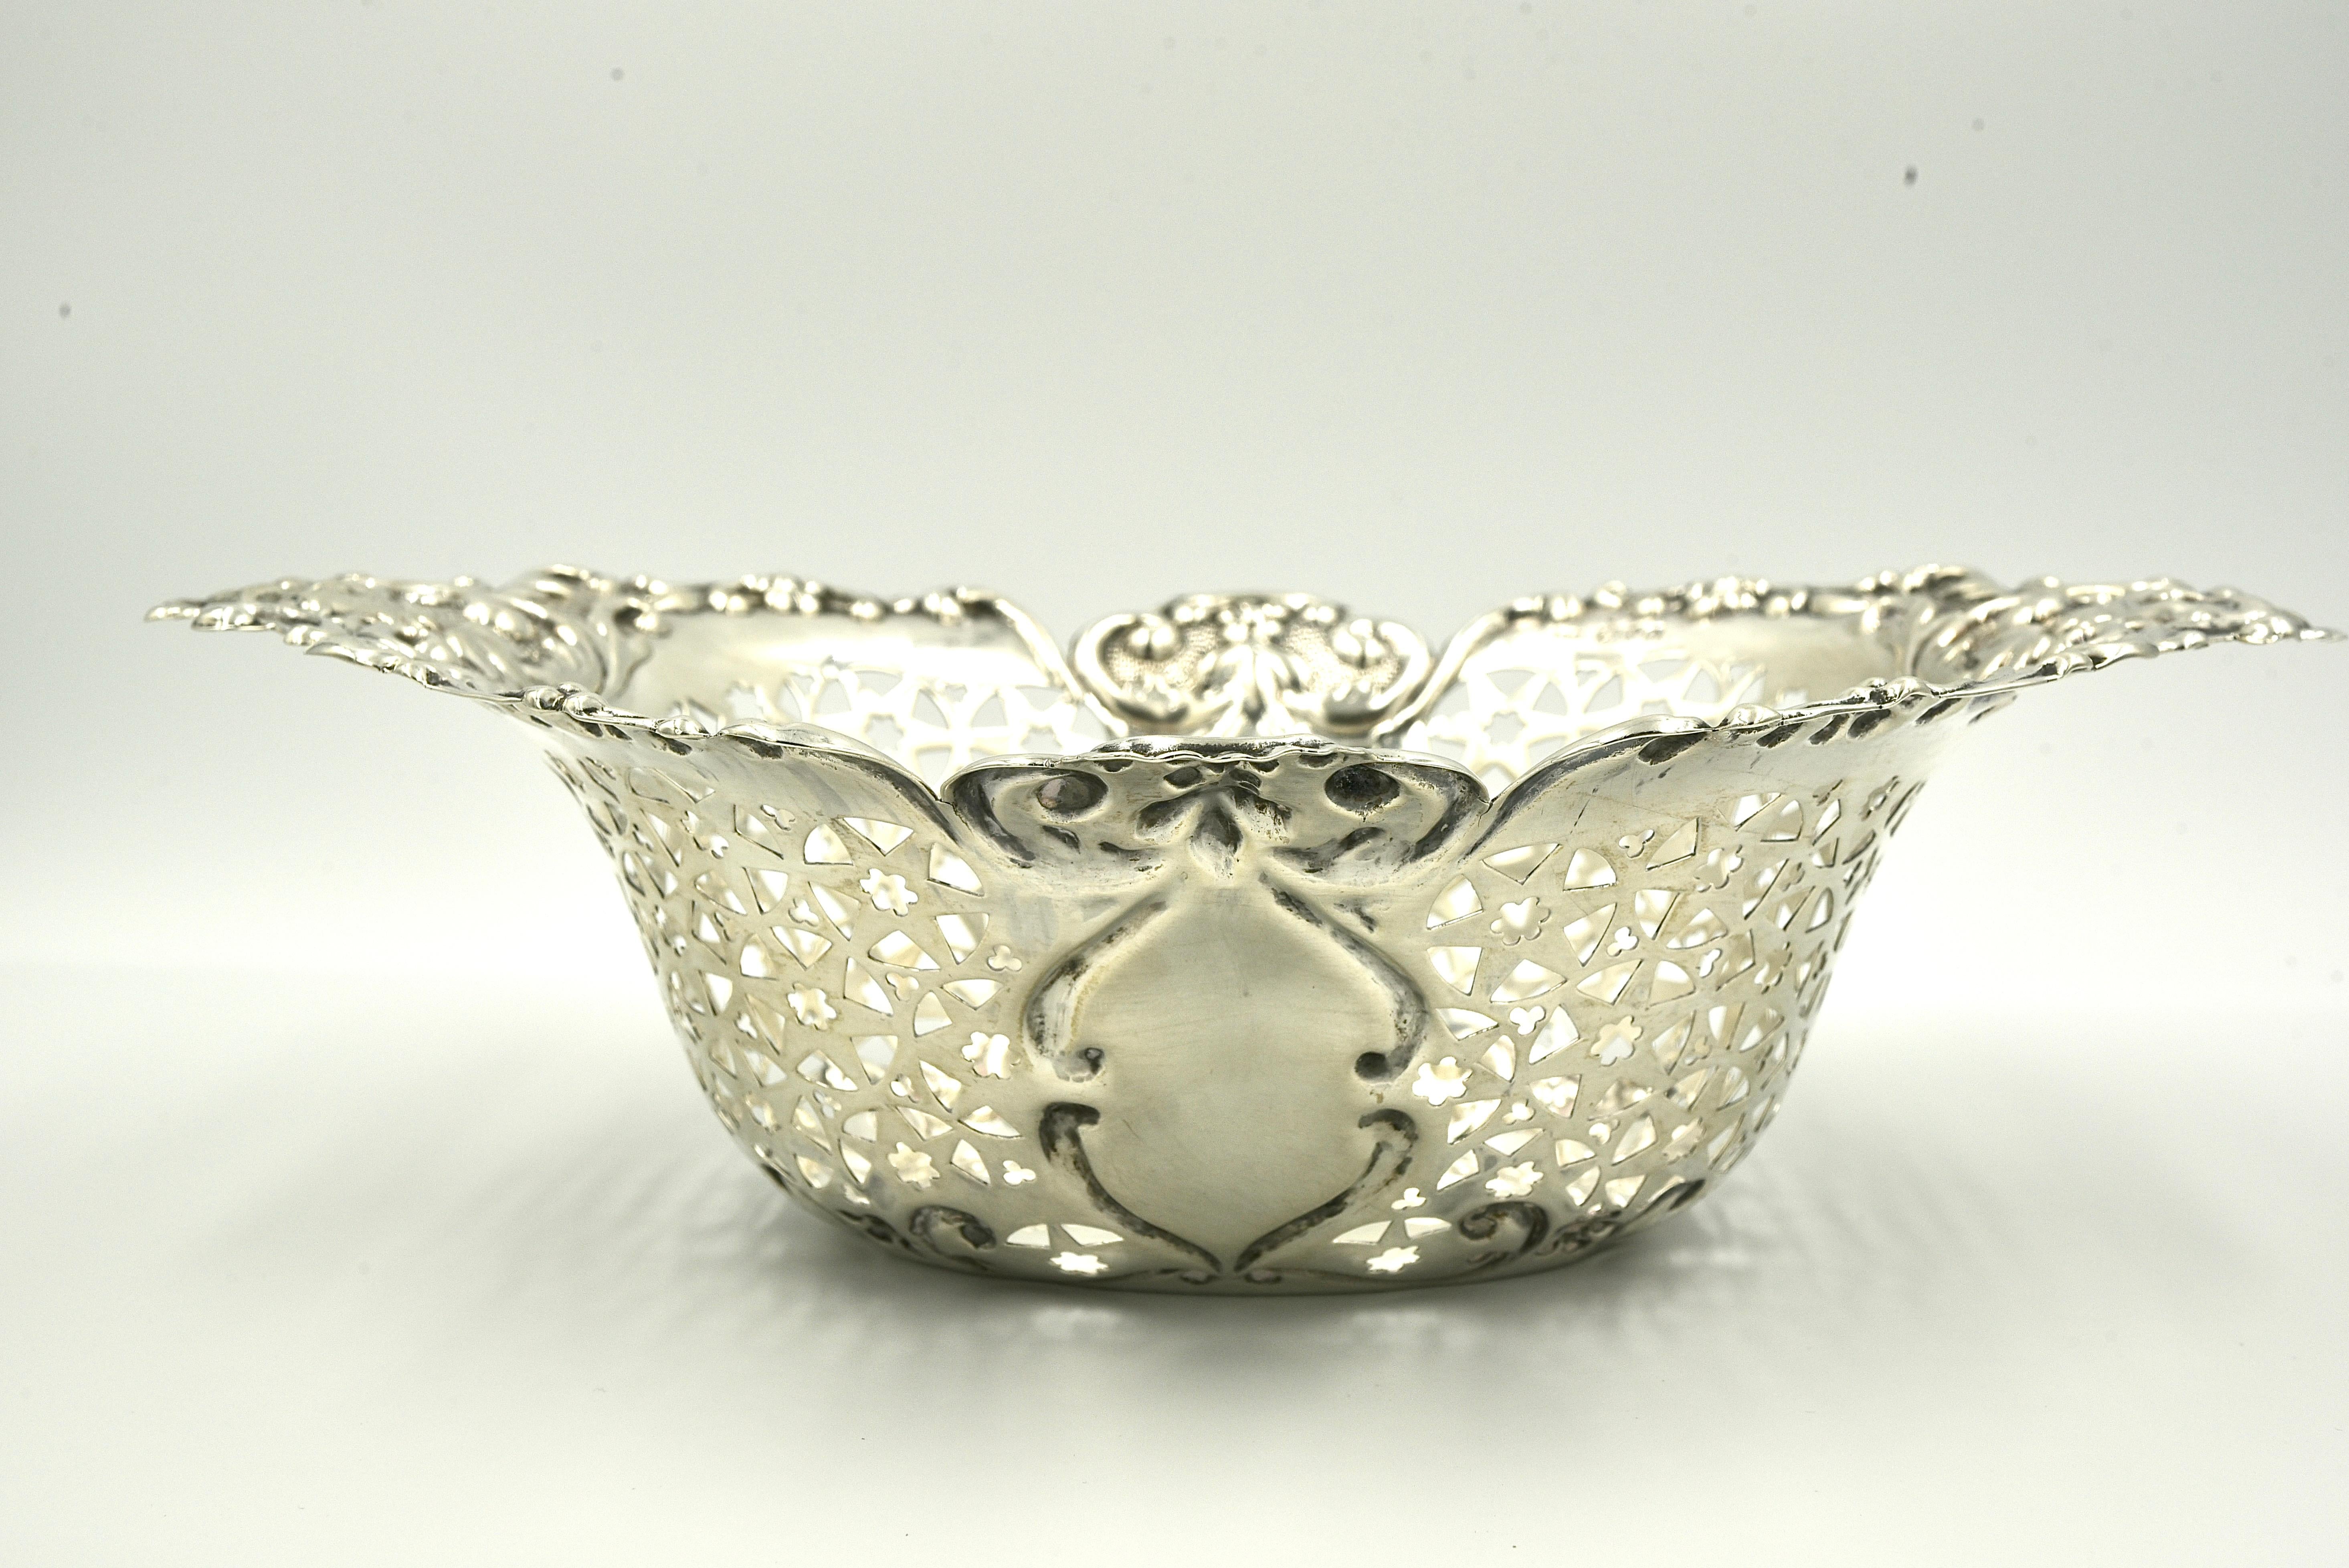 A very decorative and versatile sterling silver Victorian fruit basket with typically Victorian busy and elaborate decoration. It is a high quality basket and it has been made from a good gauge of silver which gives it a sturdy feel and a deep